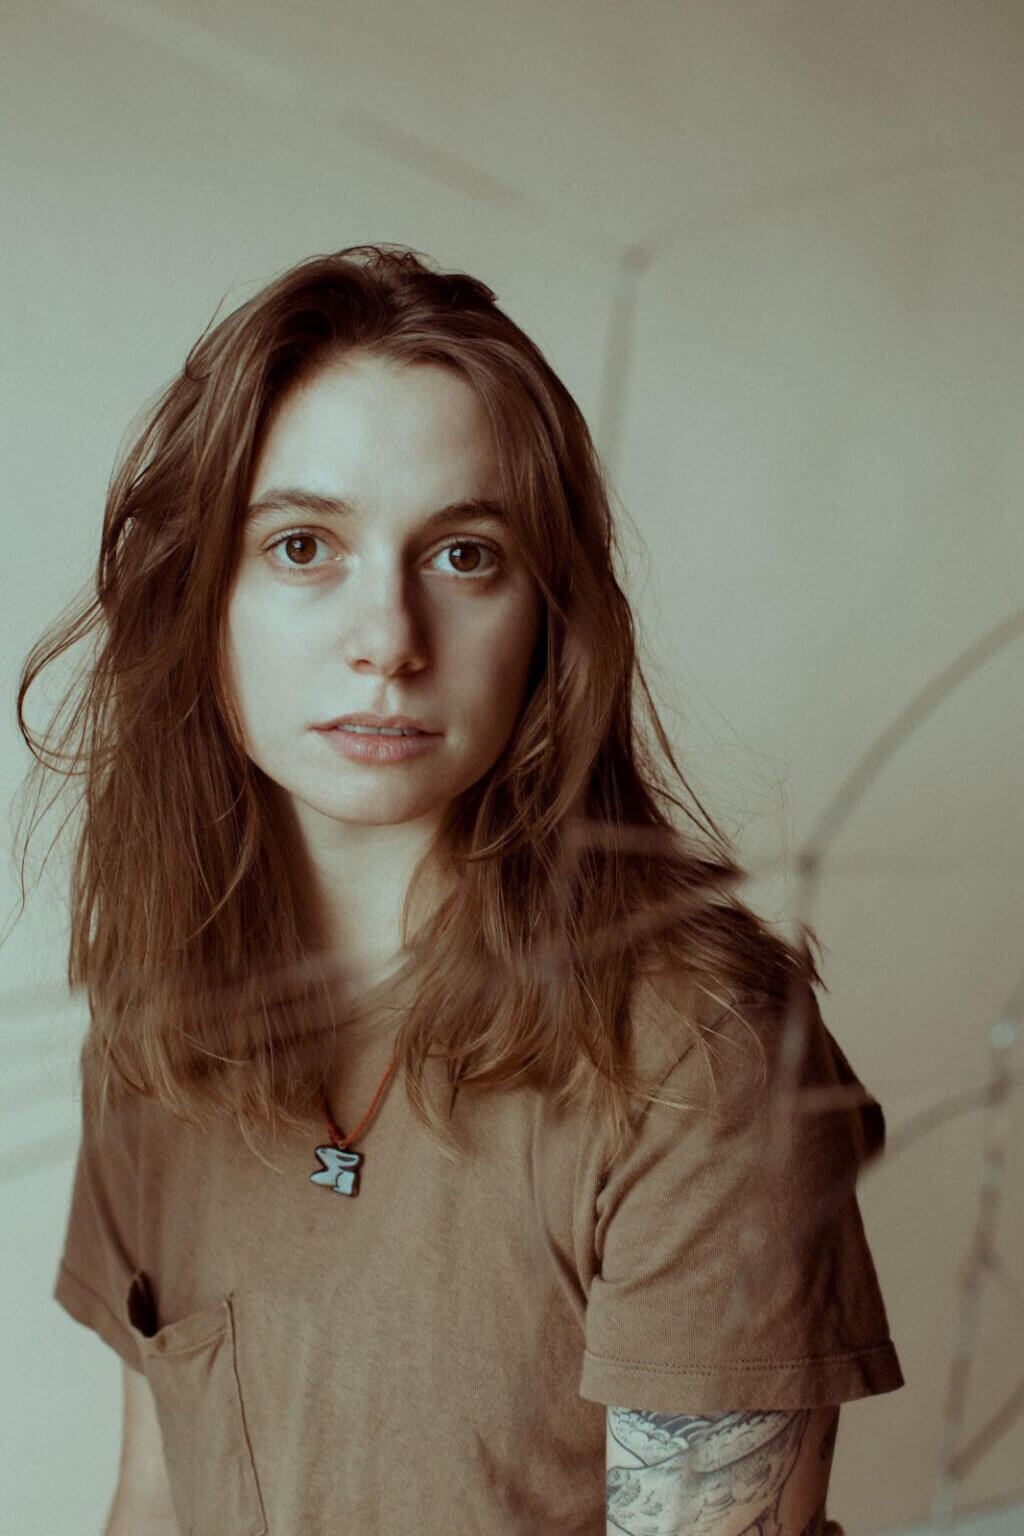 Matador Recording artist Julien Baker, has shares another single "Heatwave," off her forthcoming release Little Oblivions, out February 26th